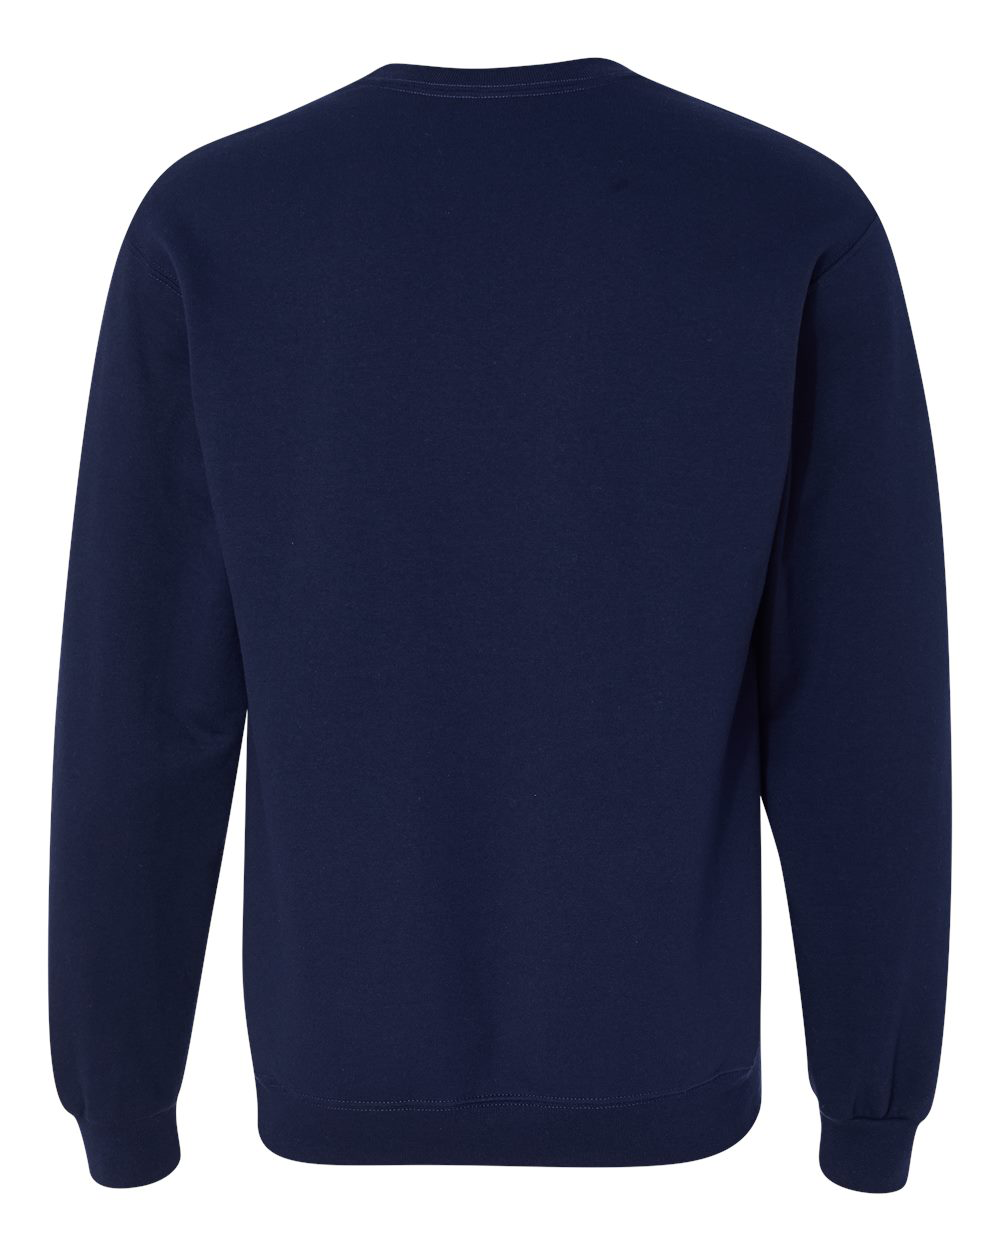 Pacifica Embroidered Crewneck Sweatshirt - UNIFORM APPROVED